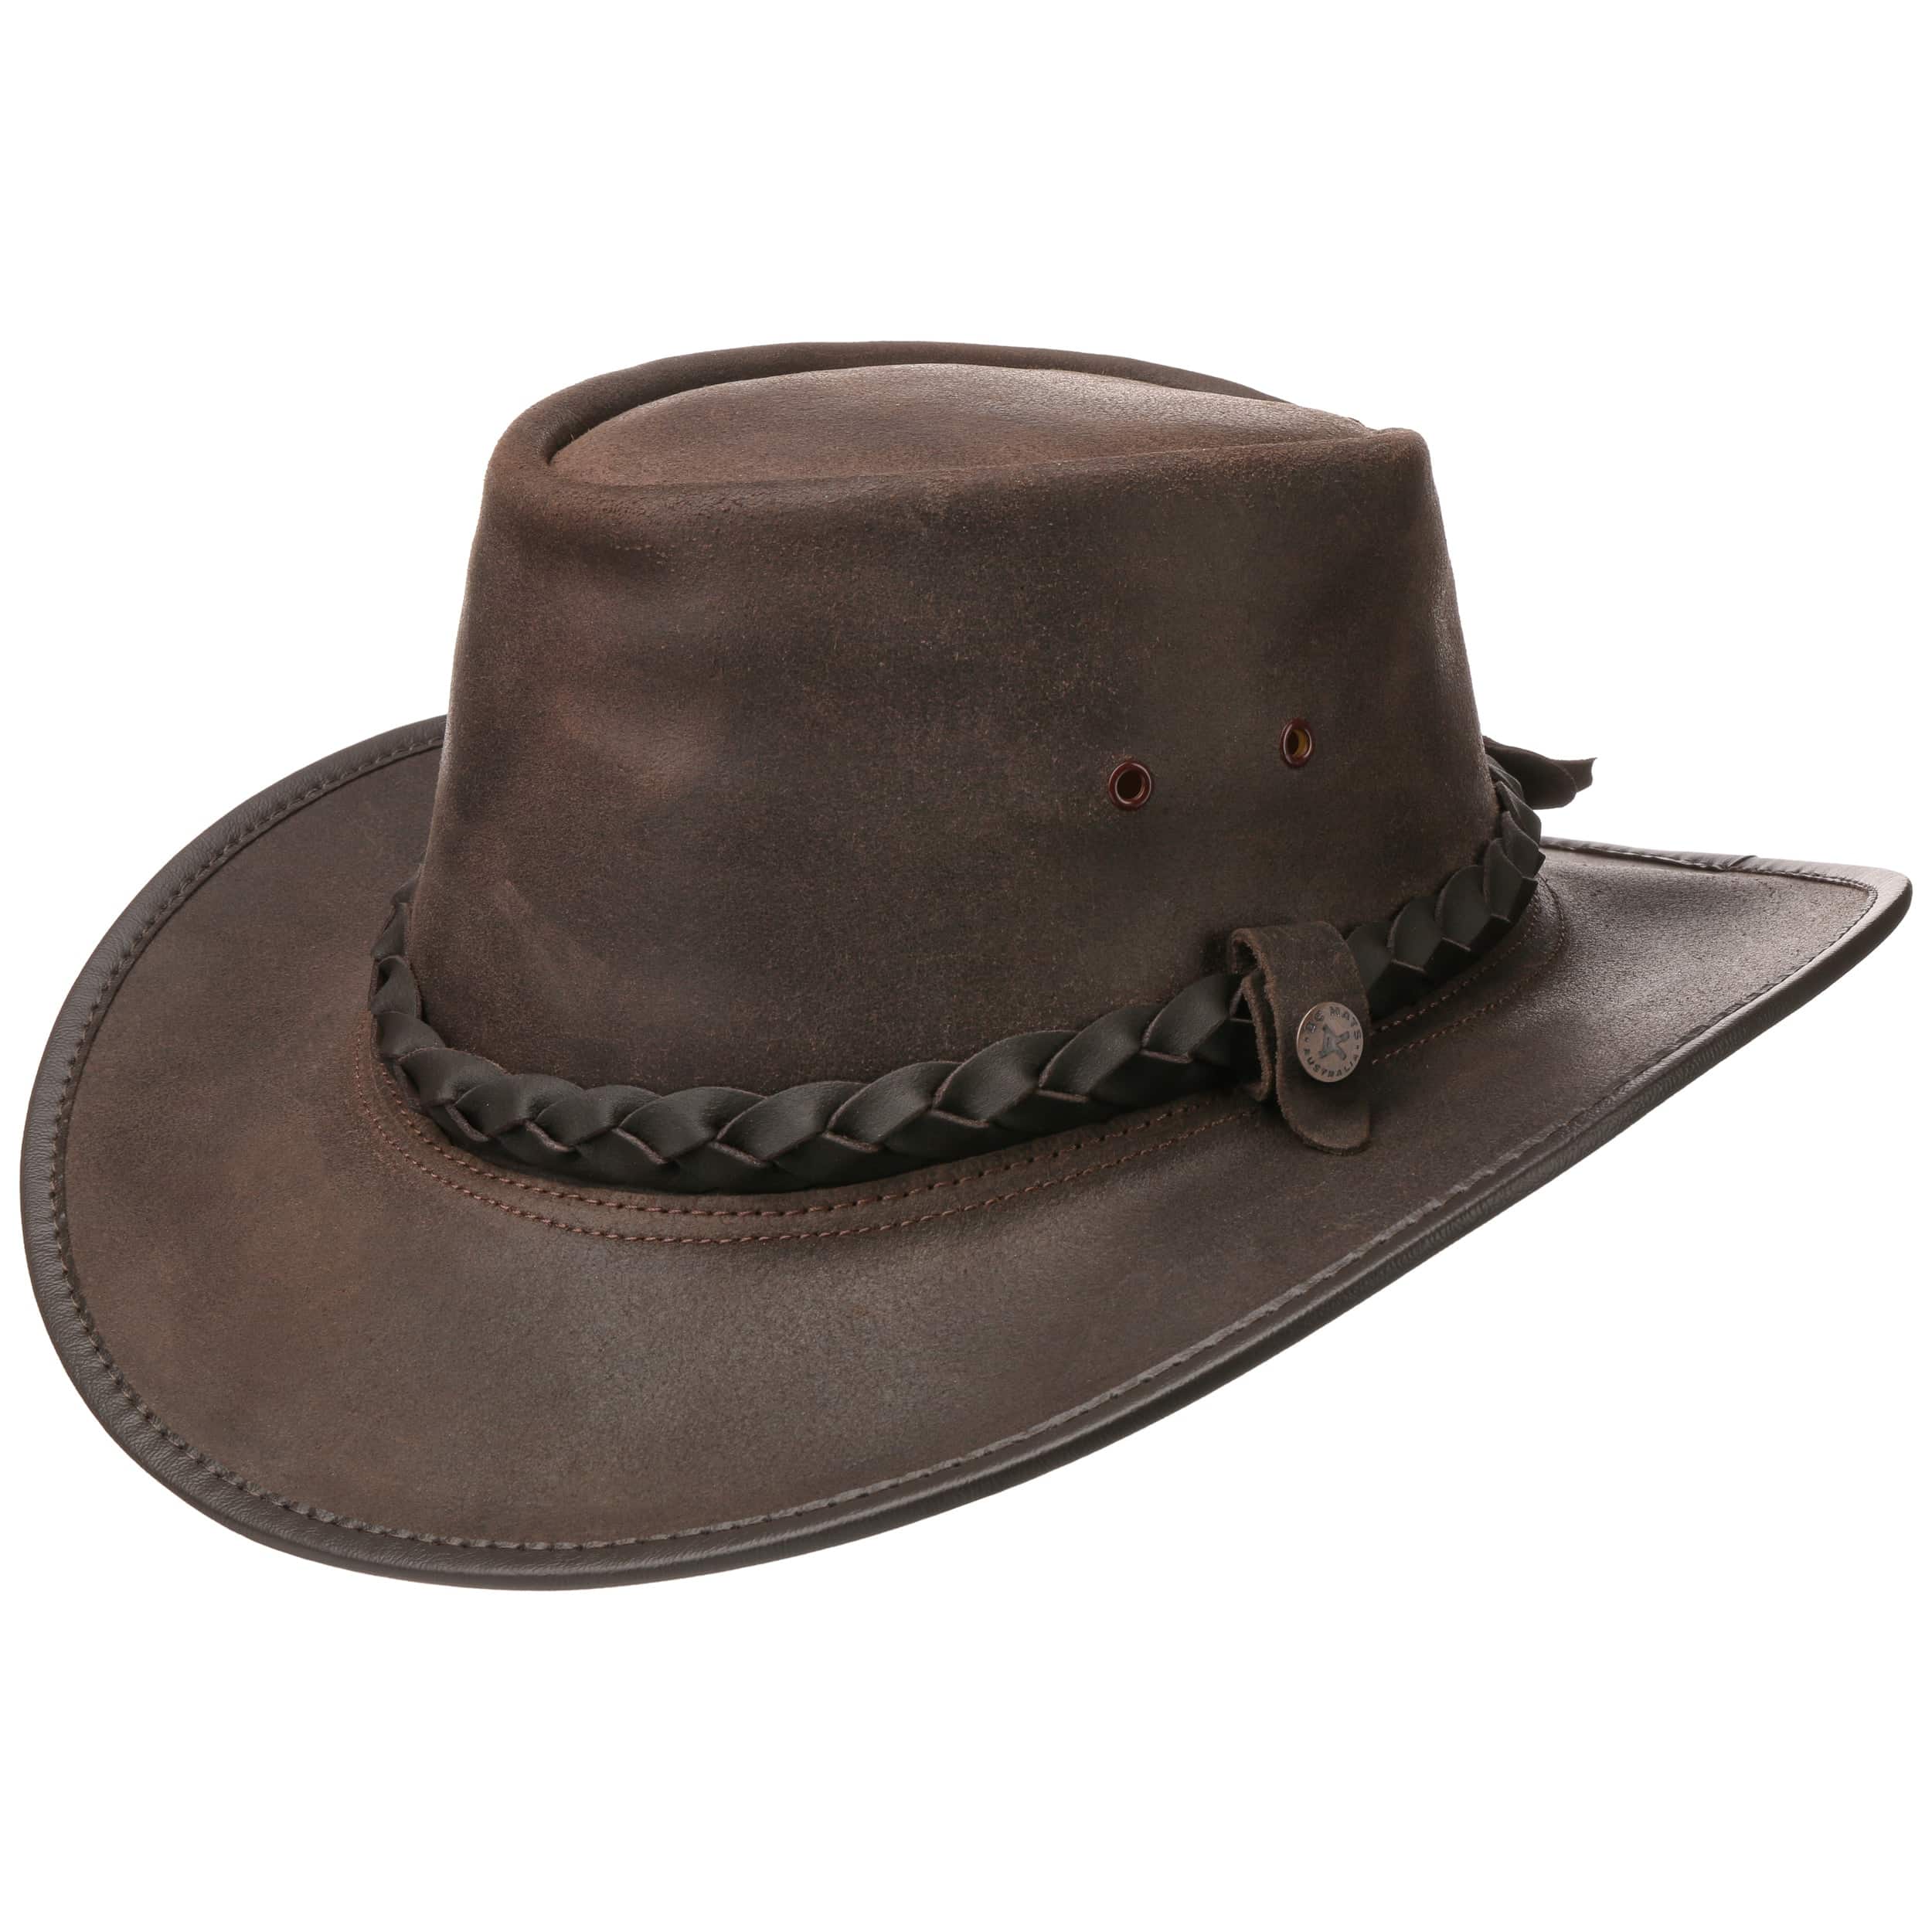 Steerhide Bac Pac Traveller Hat by BC HATS - 93,95